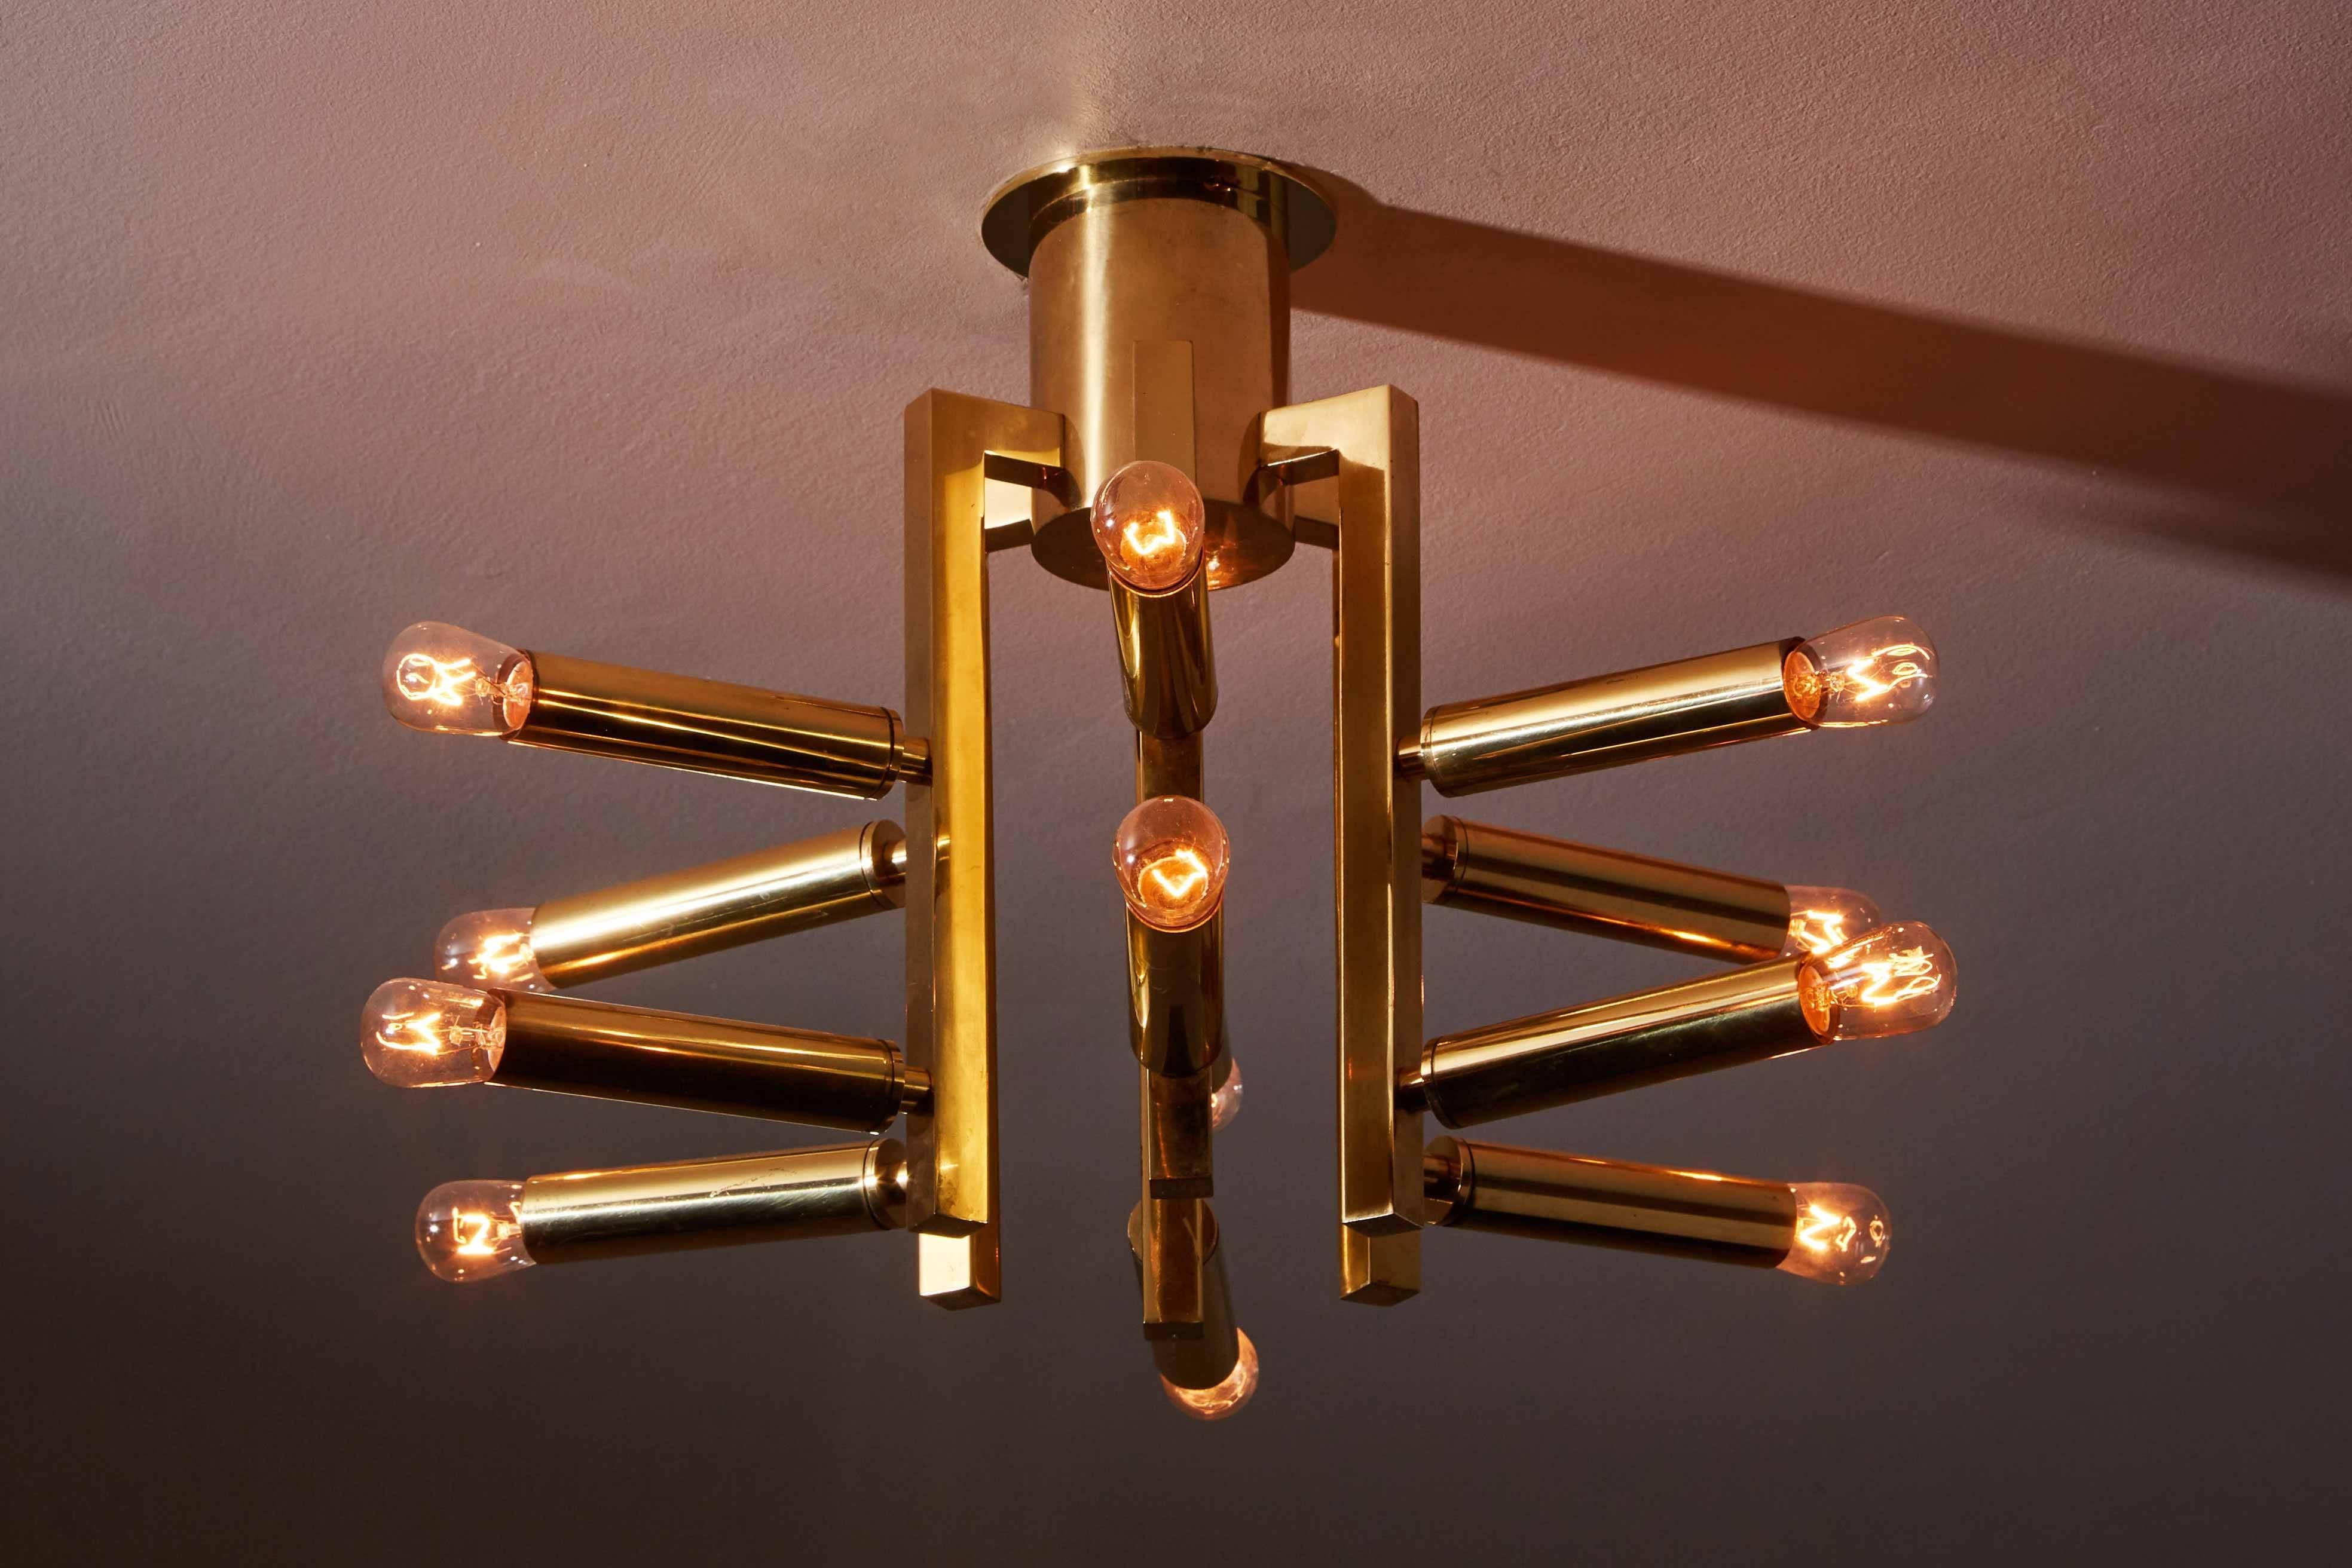 Brass twelve arm flush mount ceiling light by Sciolari designed in Italy, circa 1960s. Wired for US junction boxes. Takes 12 E14 European 25w maximum candelabra bulbs